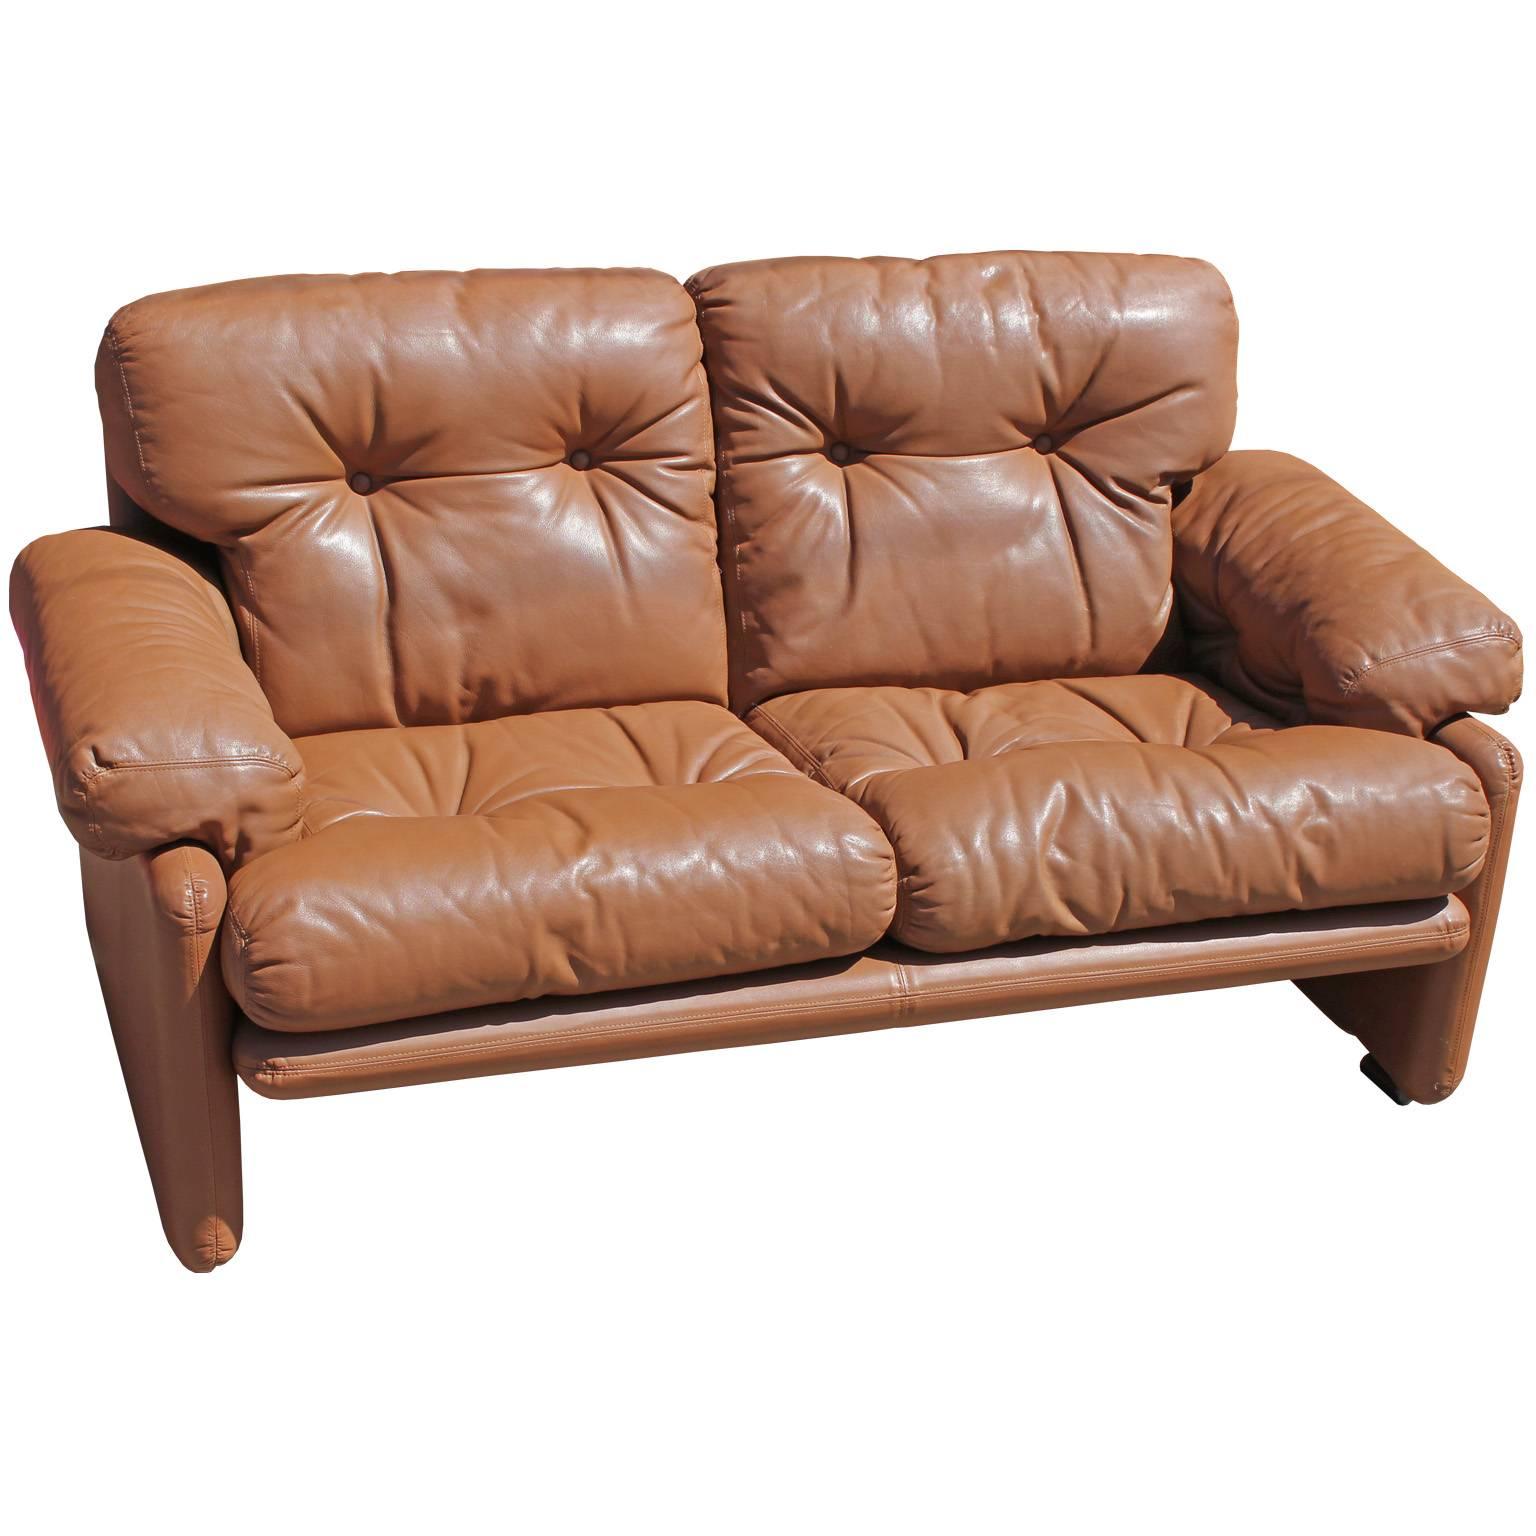 Wonderful pair of leather loveseats by B&B Italia. Caramel colored borwn leather is in great, vintage condition. Sofas would look perfect in a safari style, modern, or Mid-Century space. Matching three seat sofa available. In great vintage